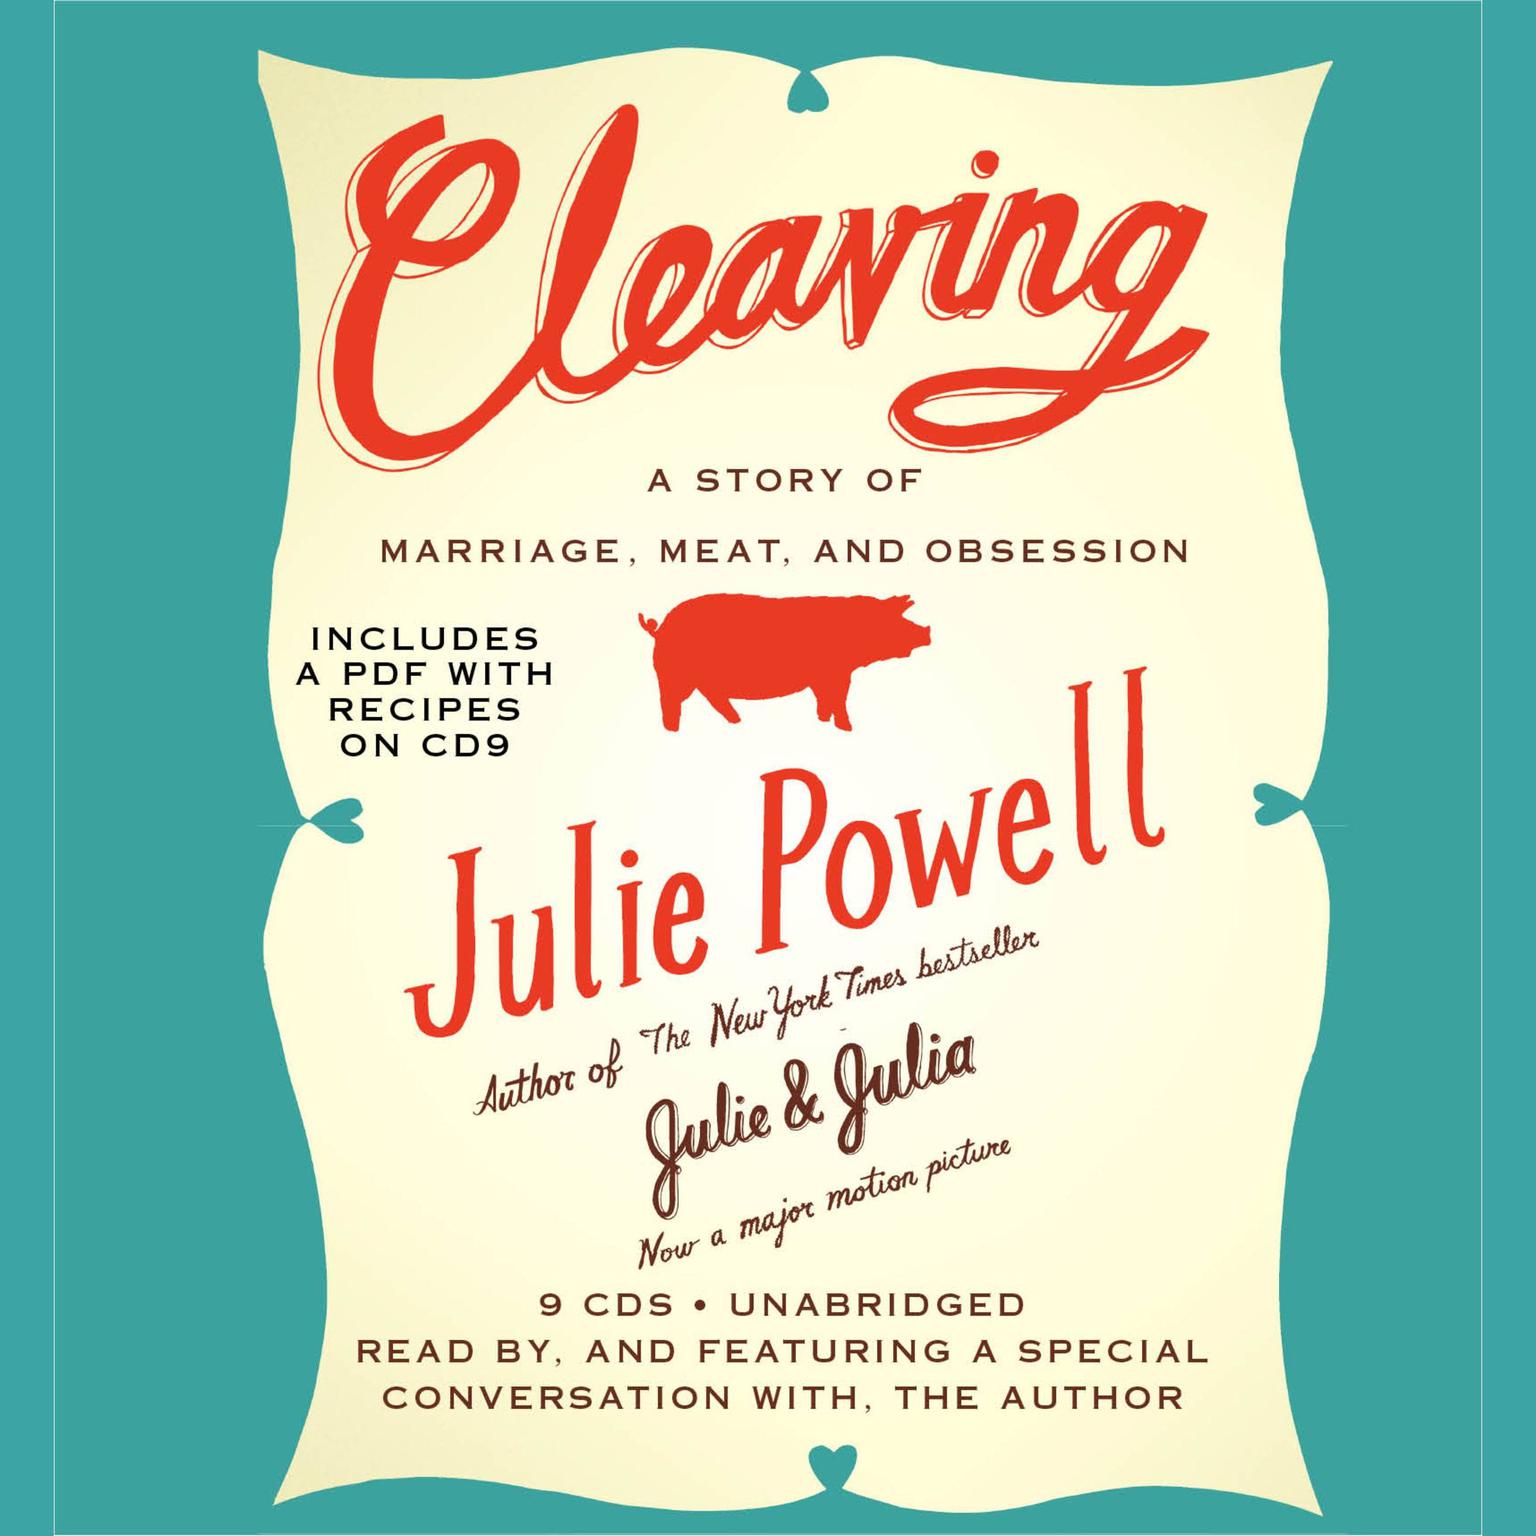 Cleaving: A Story of Marriage, Meat, and Obsession Audiobook, by Julie Powell